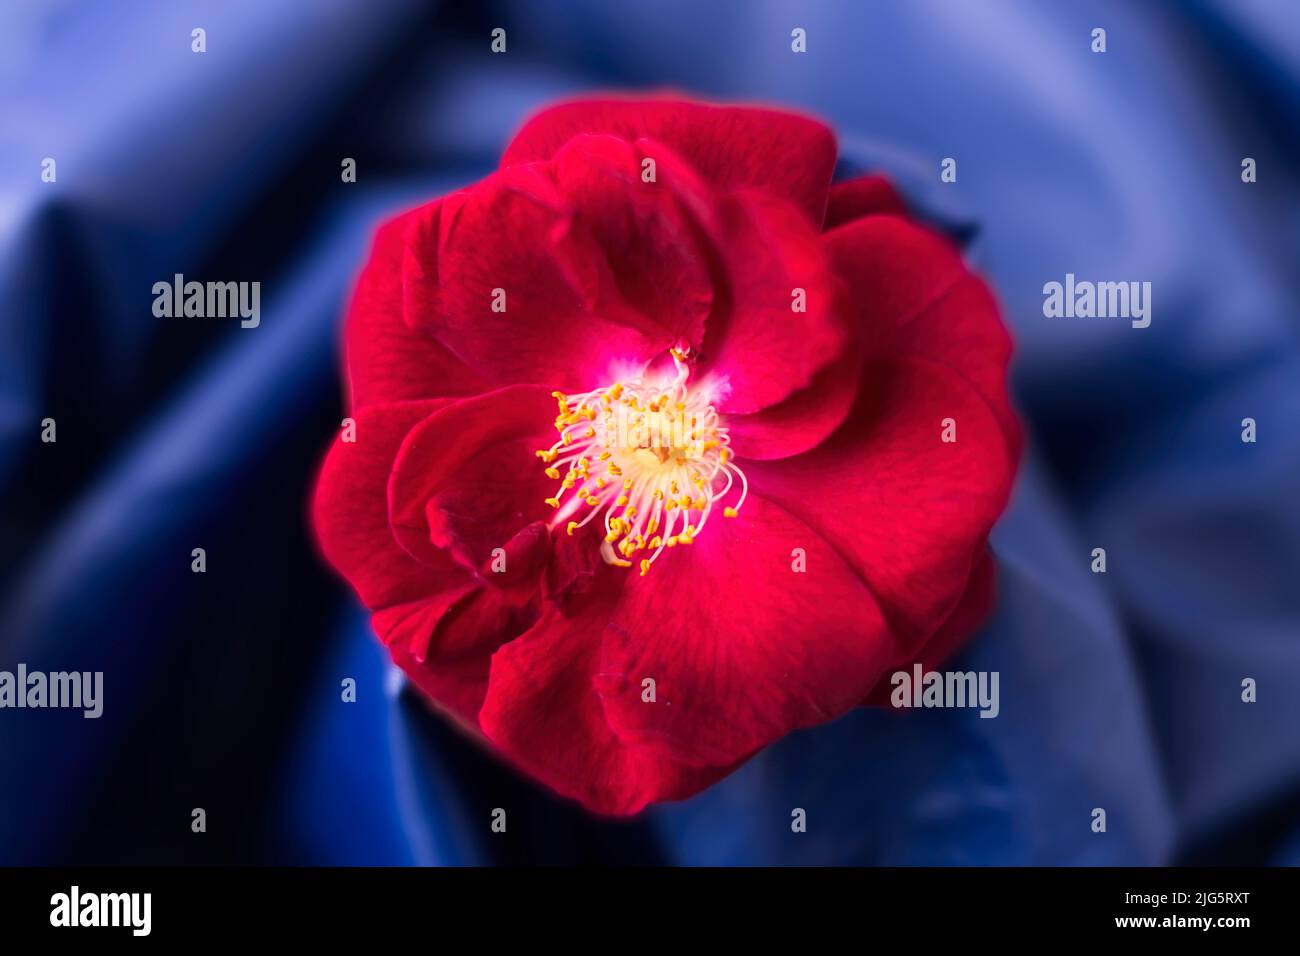 A bright red rose set on a blue cloth in this studio photo. Stock Photo